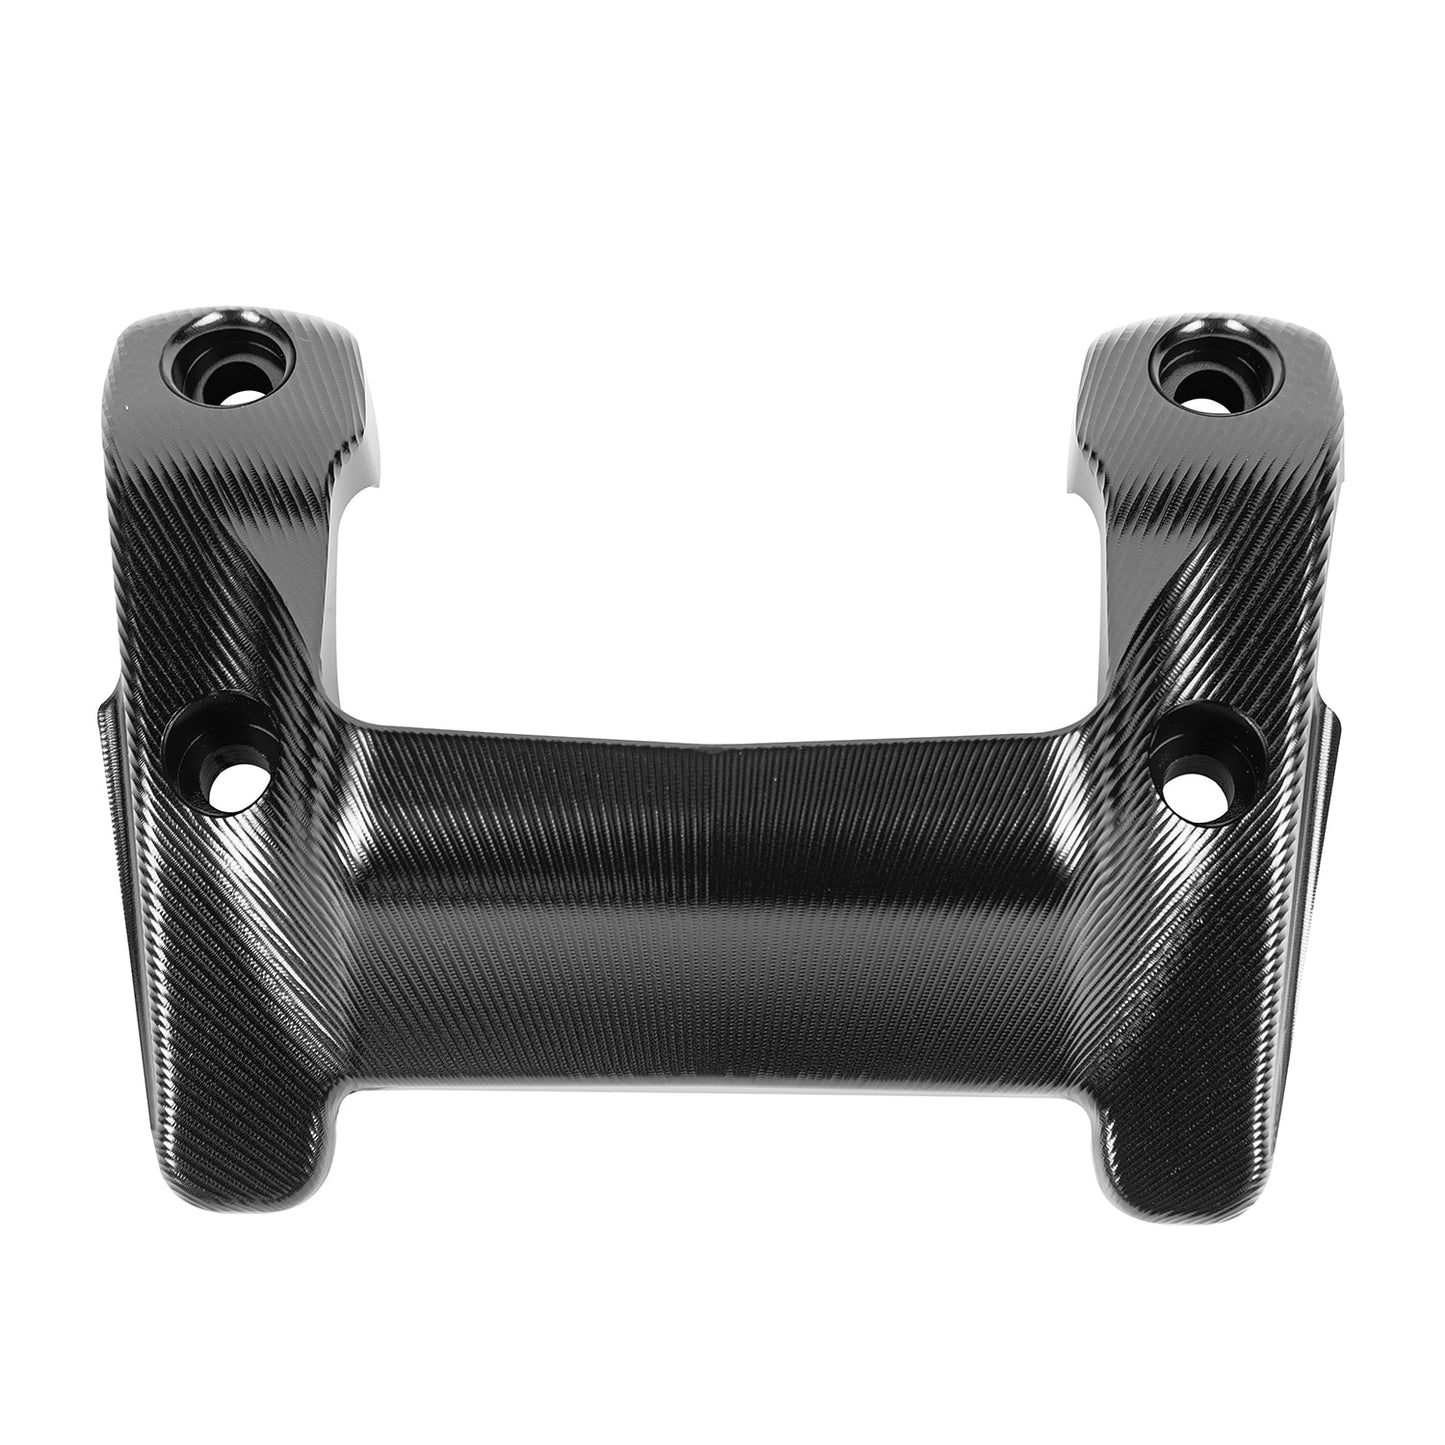 Wolfline XDiavel Motorcycle Handlebar Top Clamp Cover For Ducati XDiavel S 2016 2017 2018 2019 2020 2021 2022 2023 Accessories